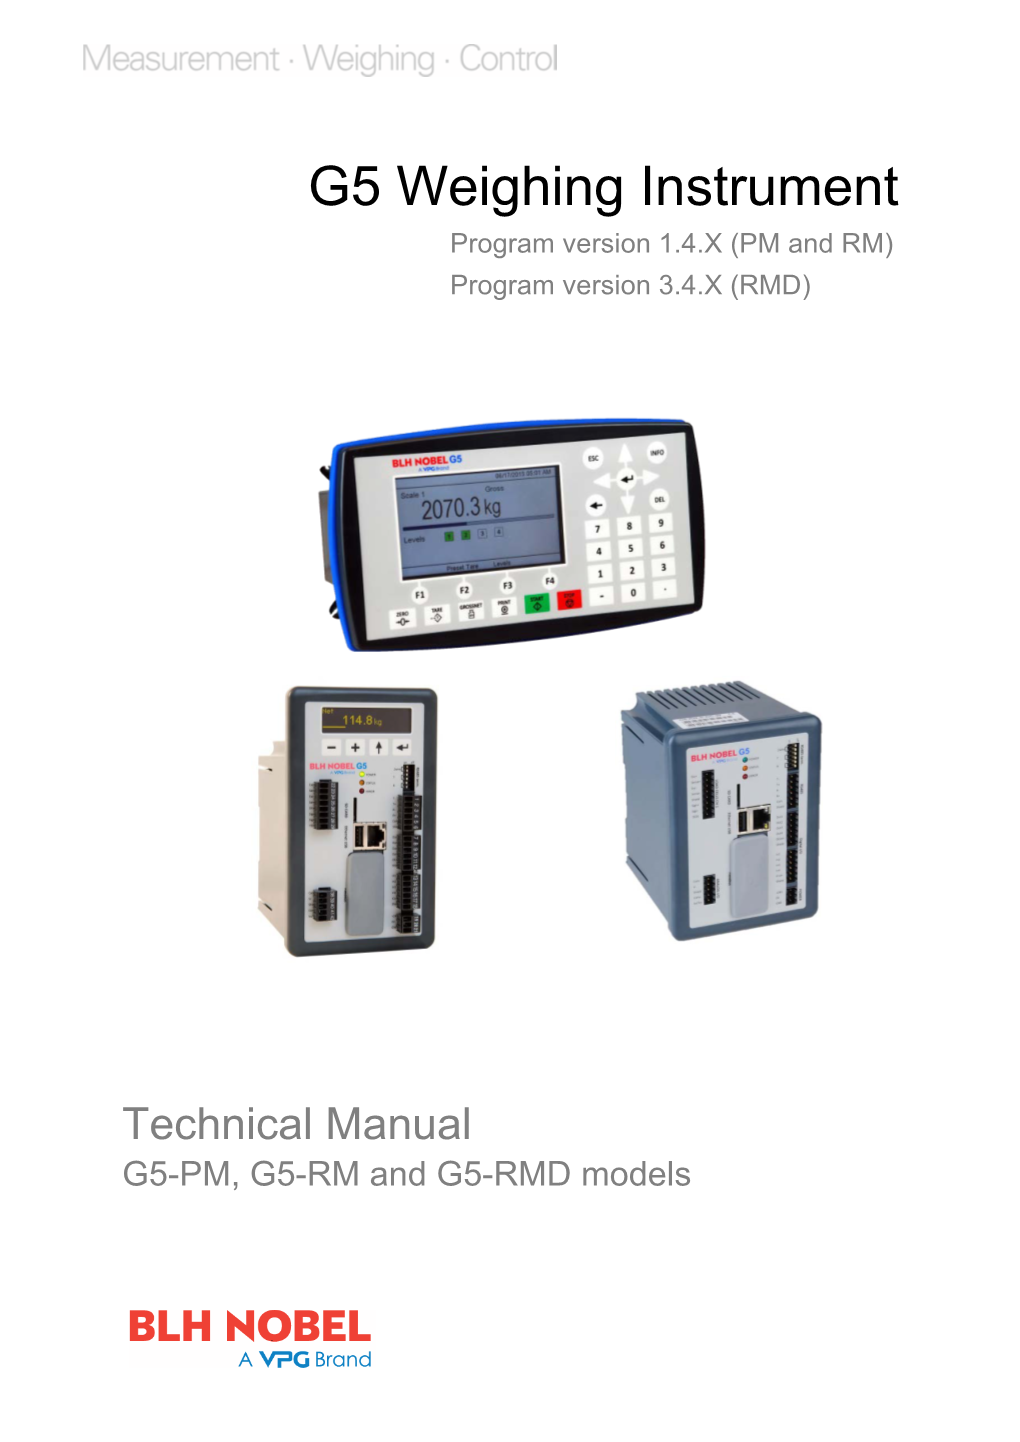 G5 Weighing Instrument. Technical Manual